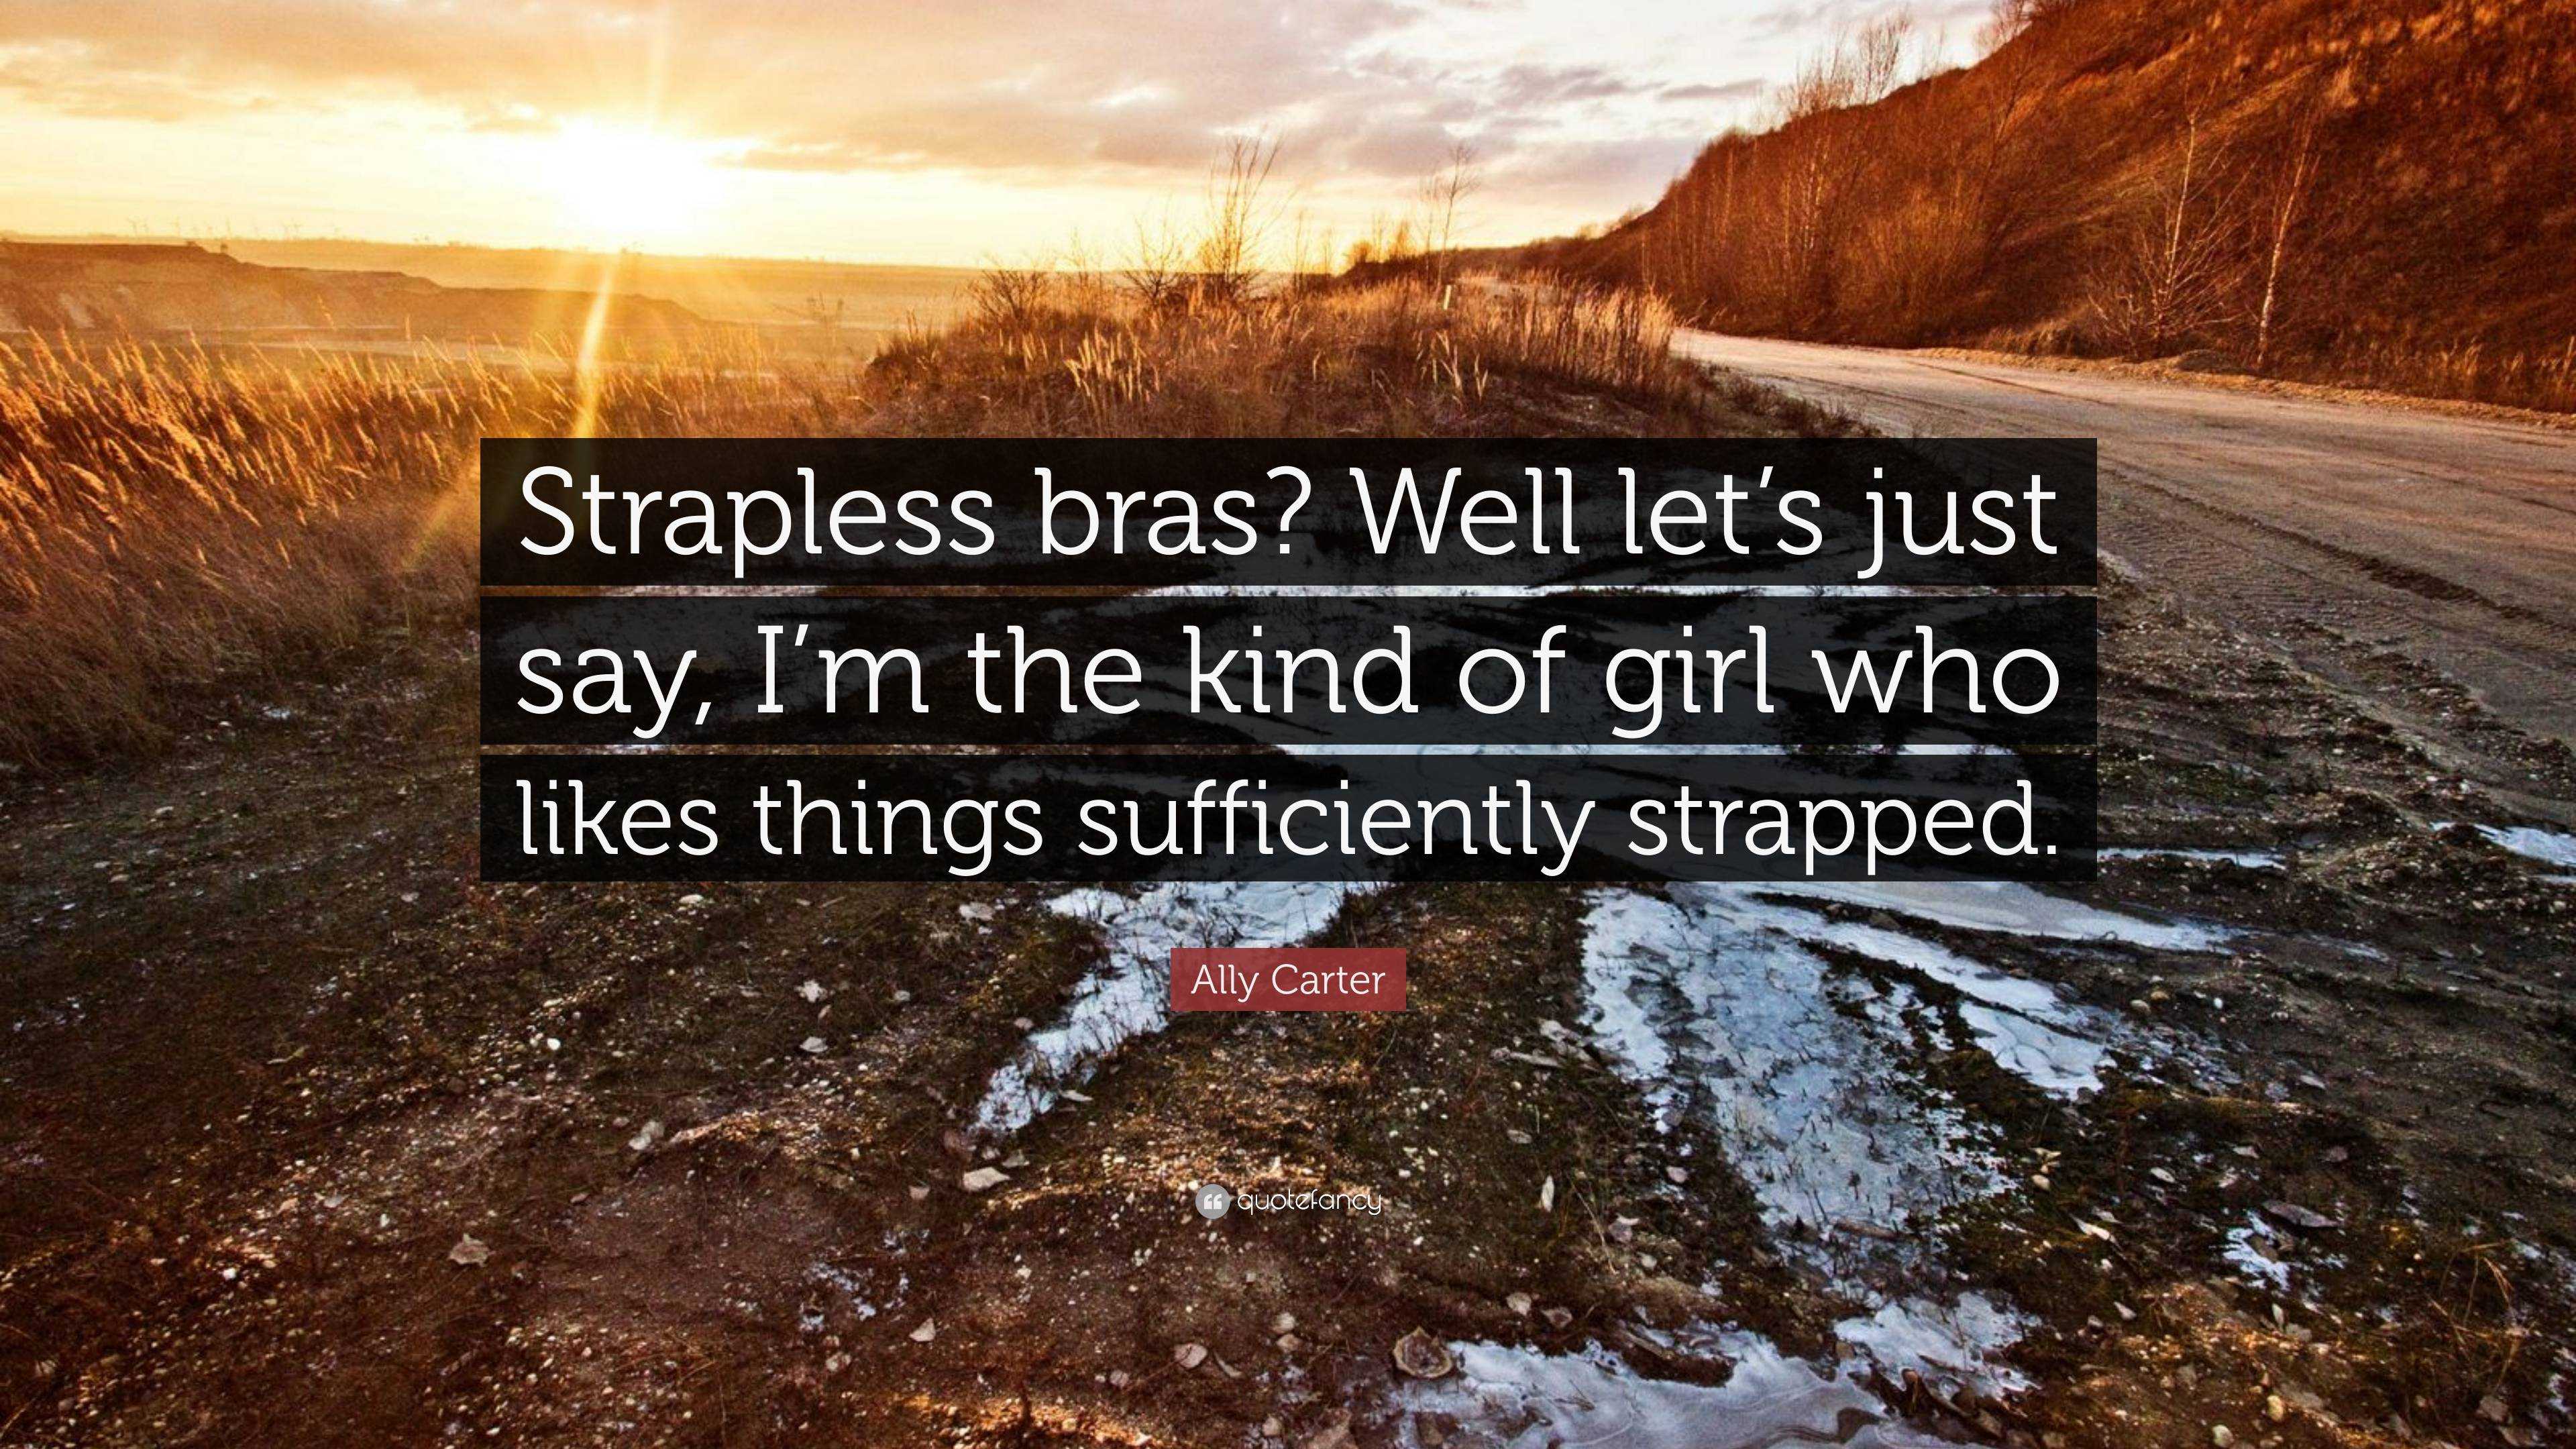 Ally Carter Quote: “Strapless bras? Well let's just say, I'm the kind of  girl who